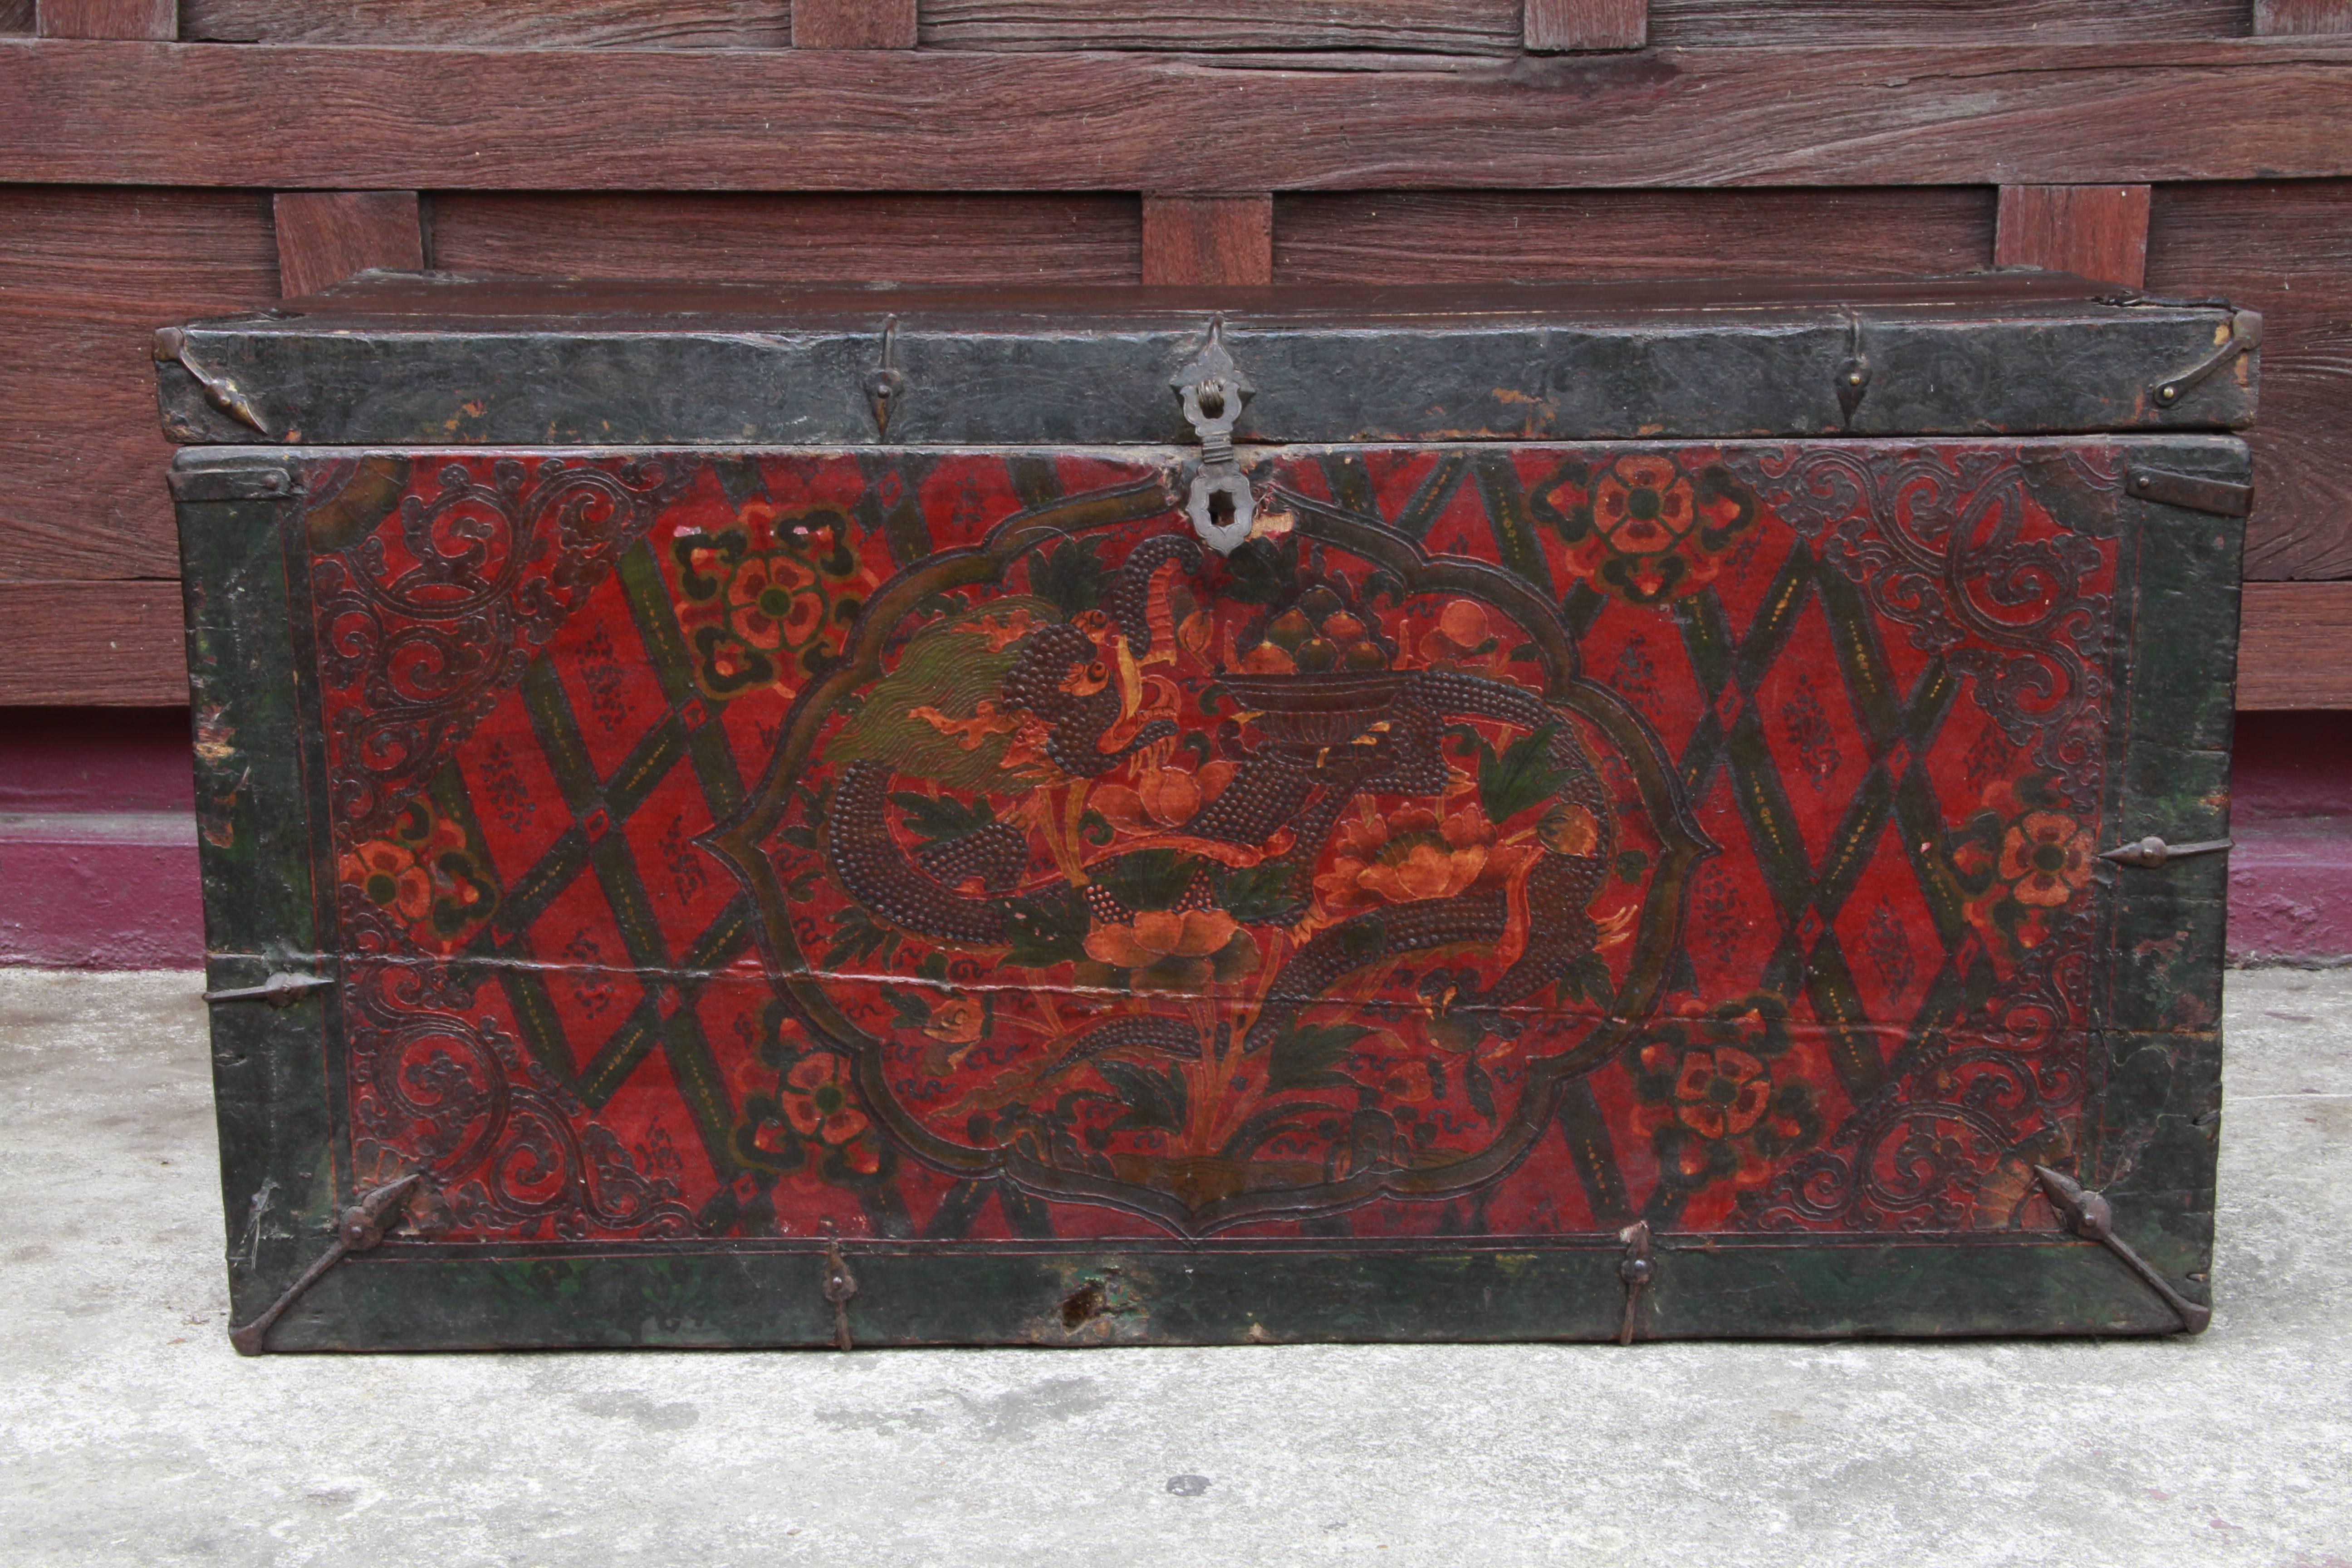 Covered storage boxes are among the earliest examples of surviving Tibetan furniture produced from the 16th-18th centuries (by the 19th century they were being supplanted by the cabinet). The box or trunk is decorated with raised gesso on the front.